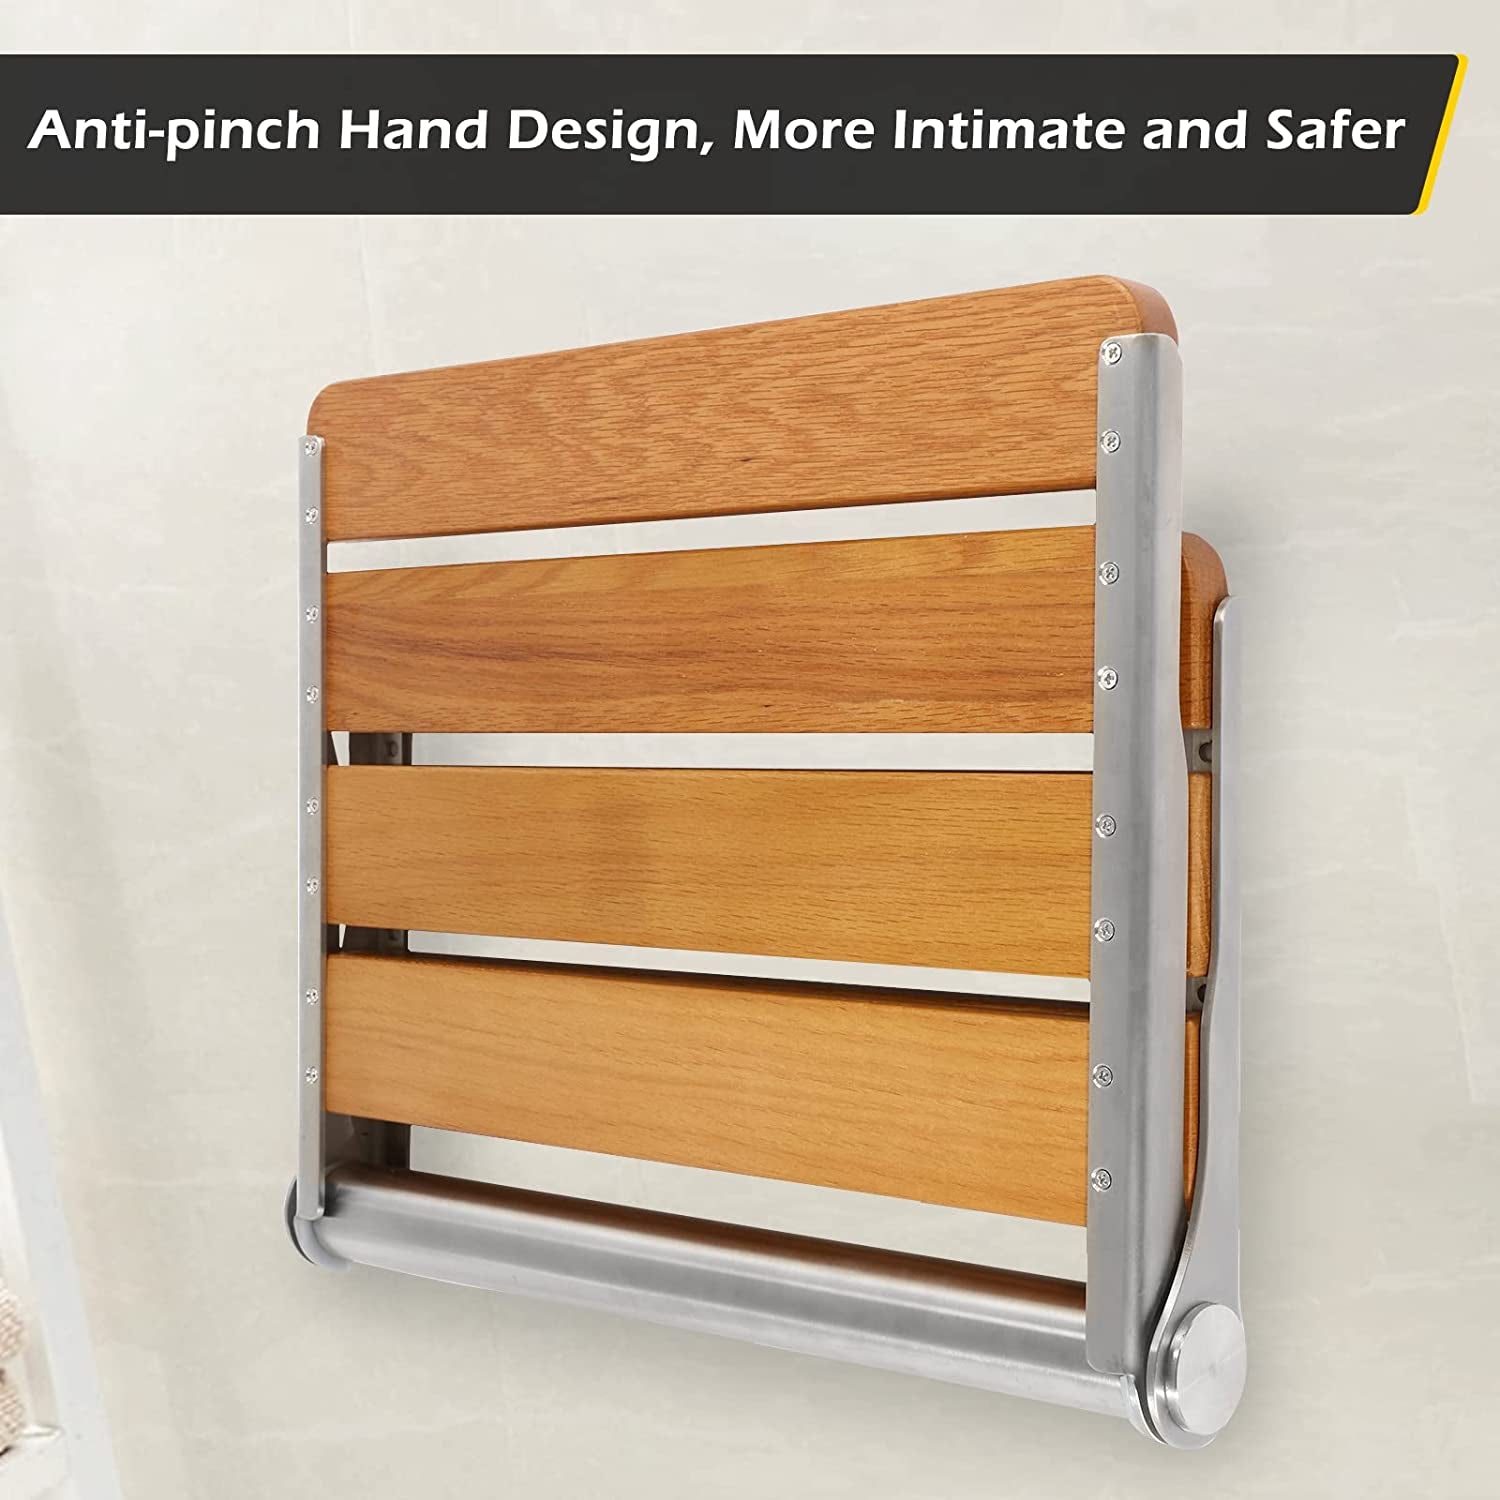 Folding Shower Seat Wall Mounted Teak Wood Fold down Shower Seat Home Care Shower Bench for inside Shower, Bathroom Fold up Shower Chair (16.1''*13.4'')